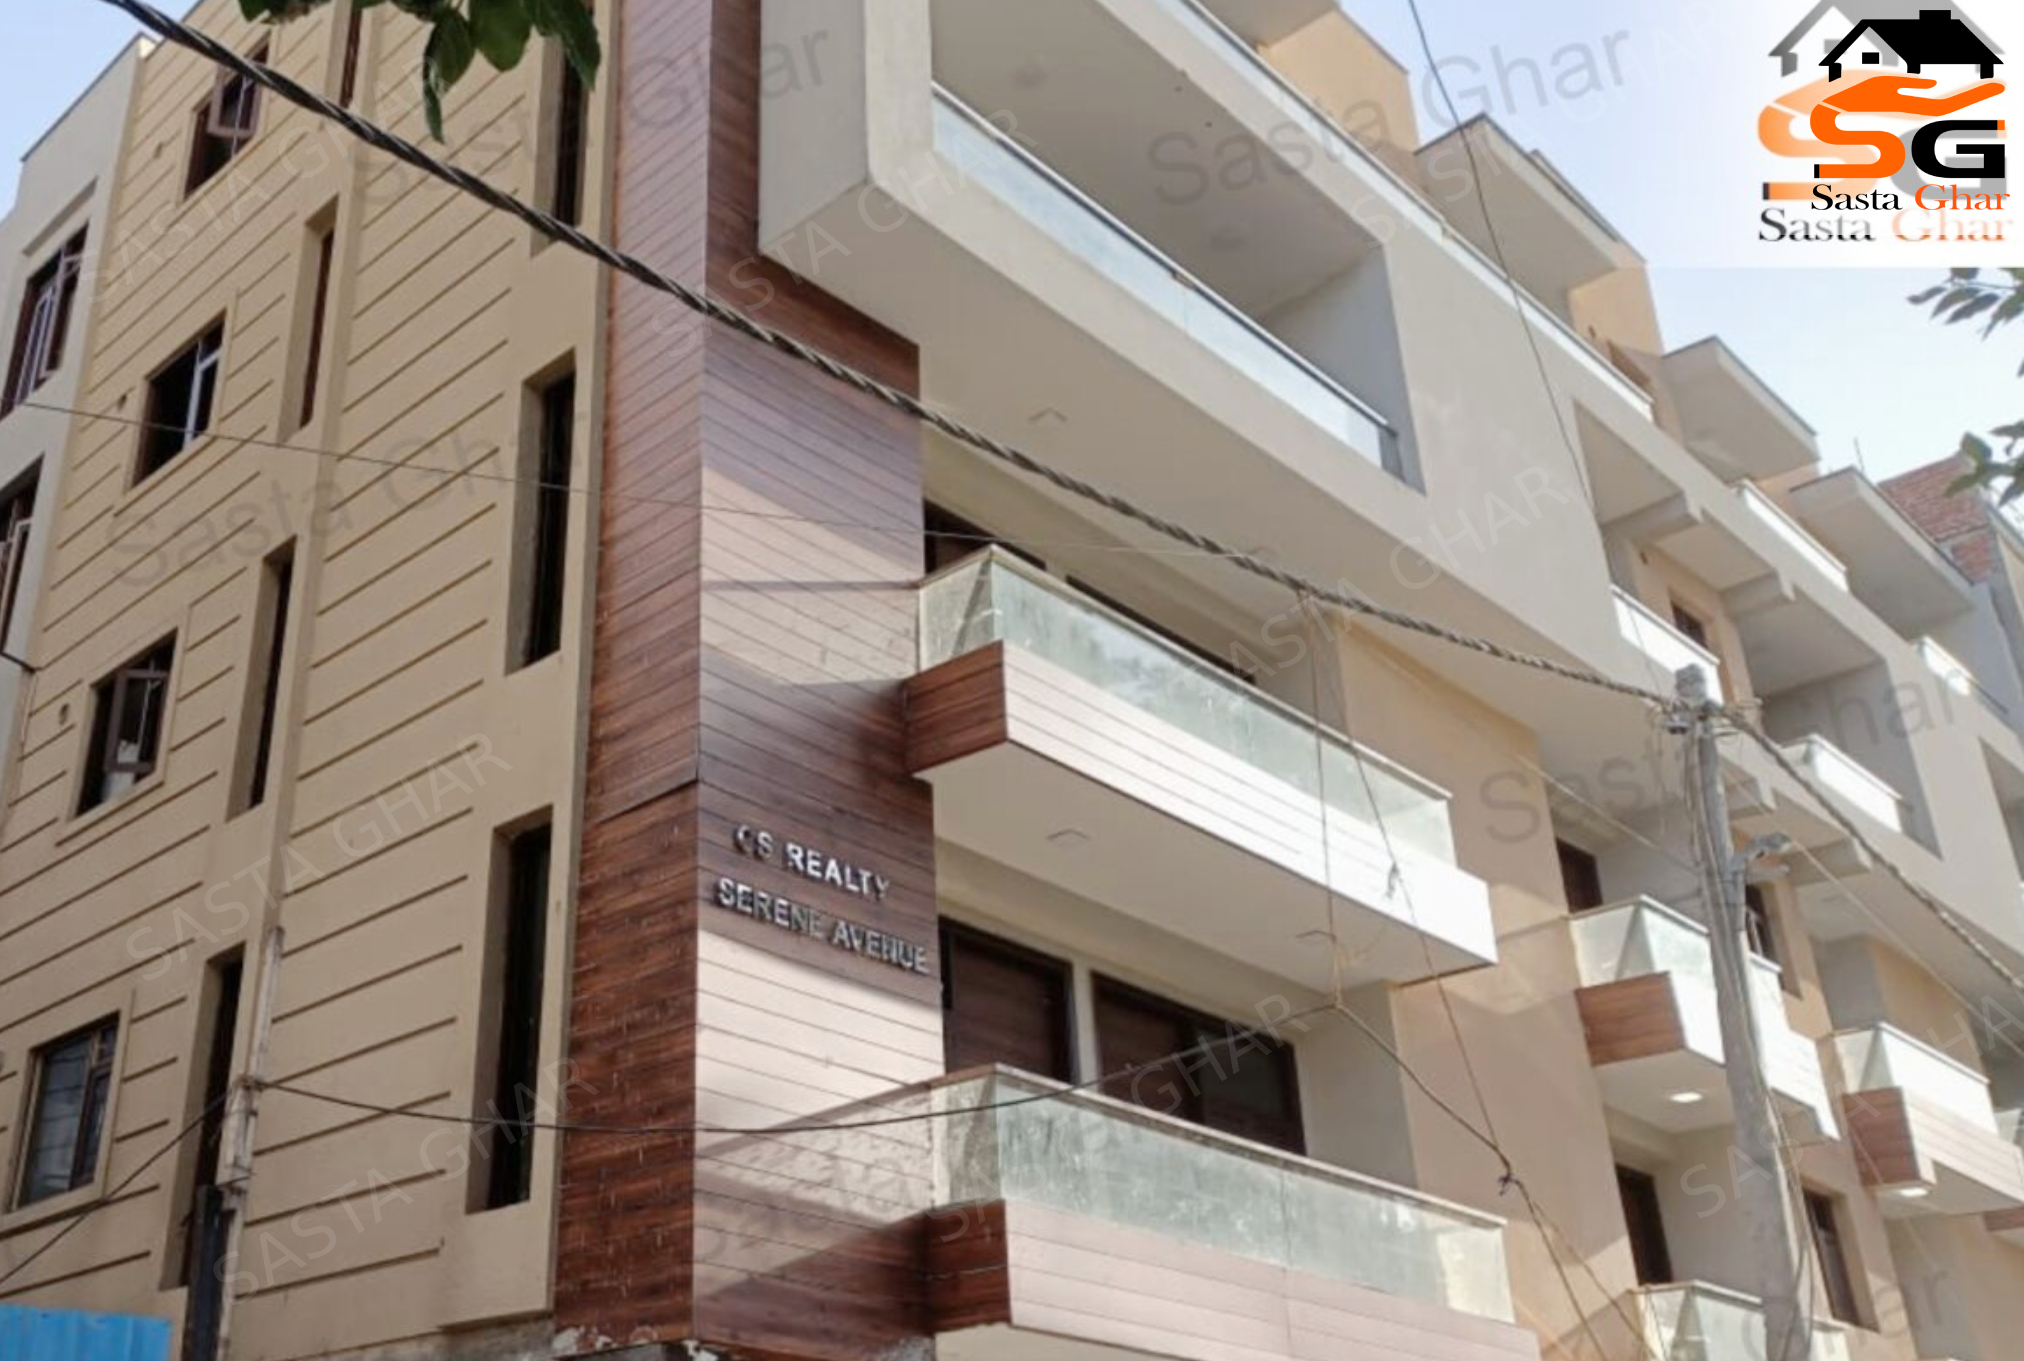 3 BHK Flats In Serena Avenue Image